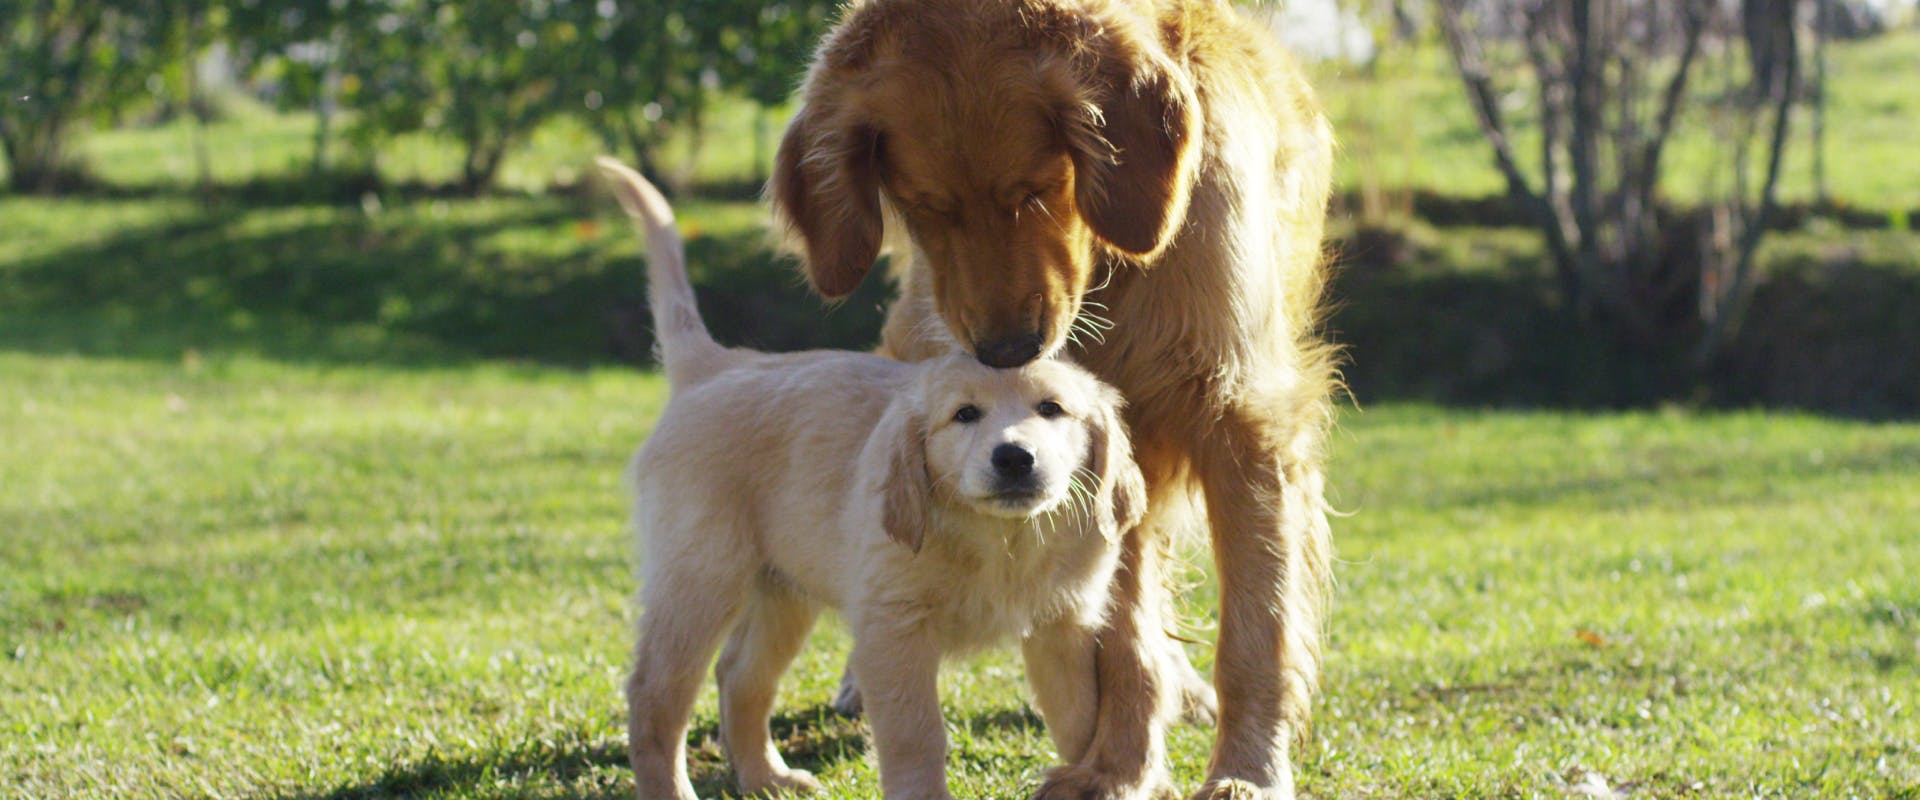 An adult dog sniffs the head of a puppy.